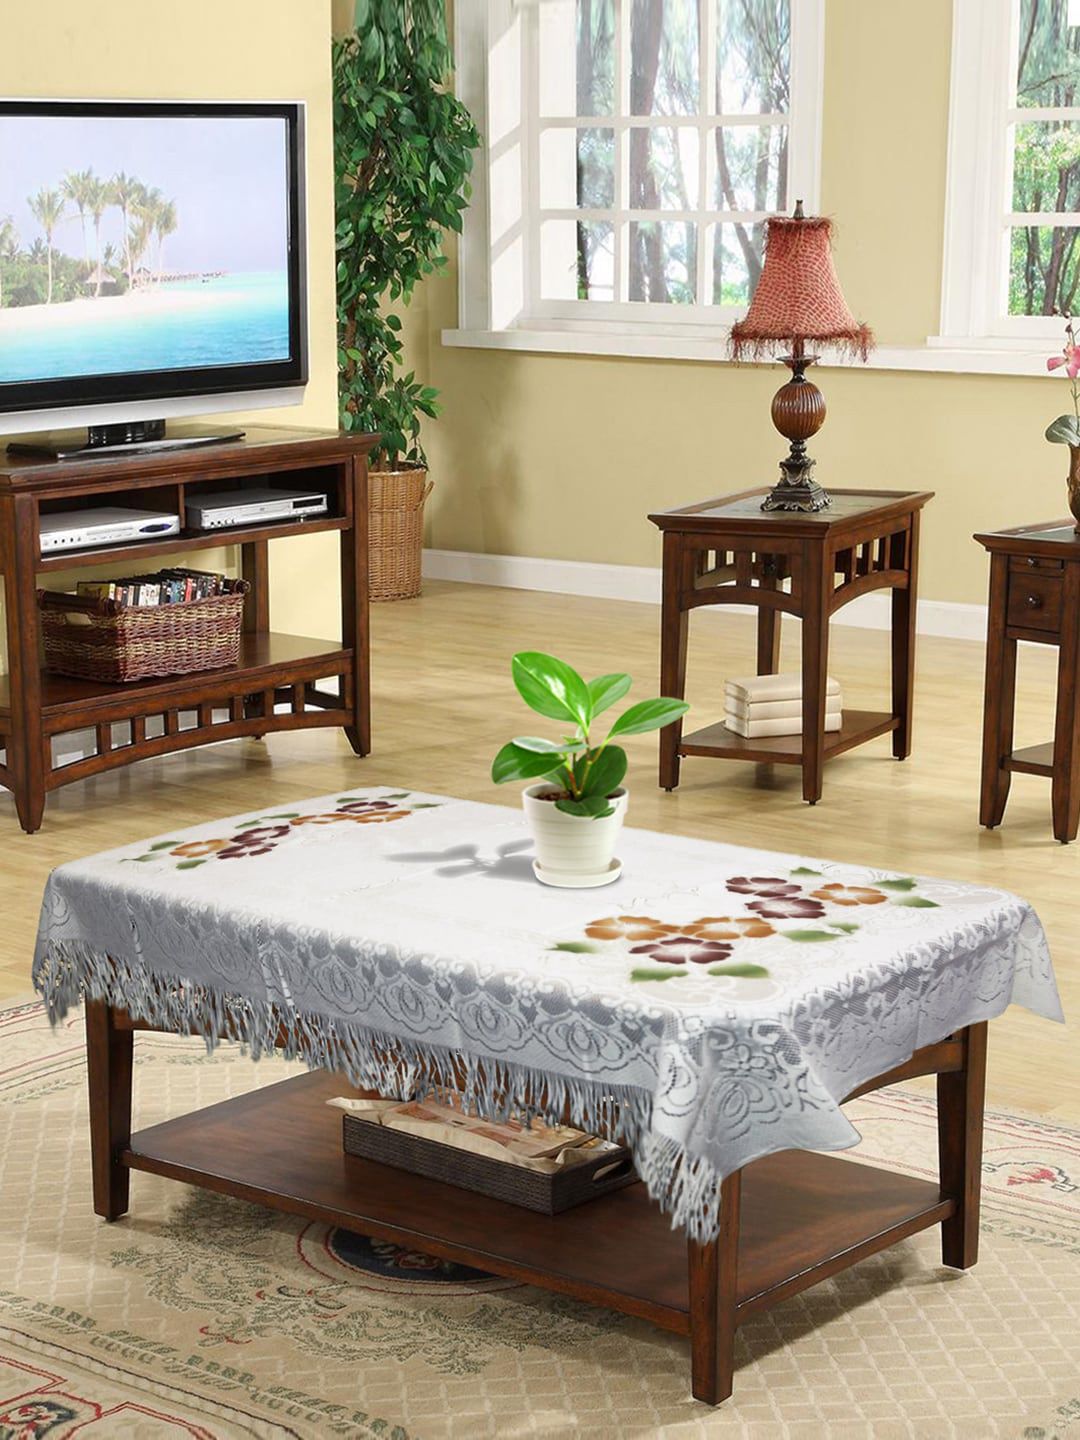 Kuber Industries Cream Floral 4 Seater Cotton Table Cover Price in India